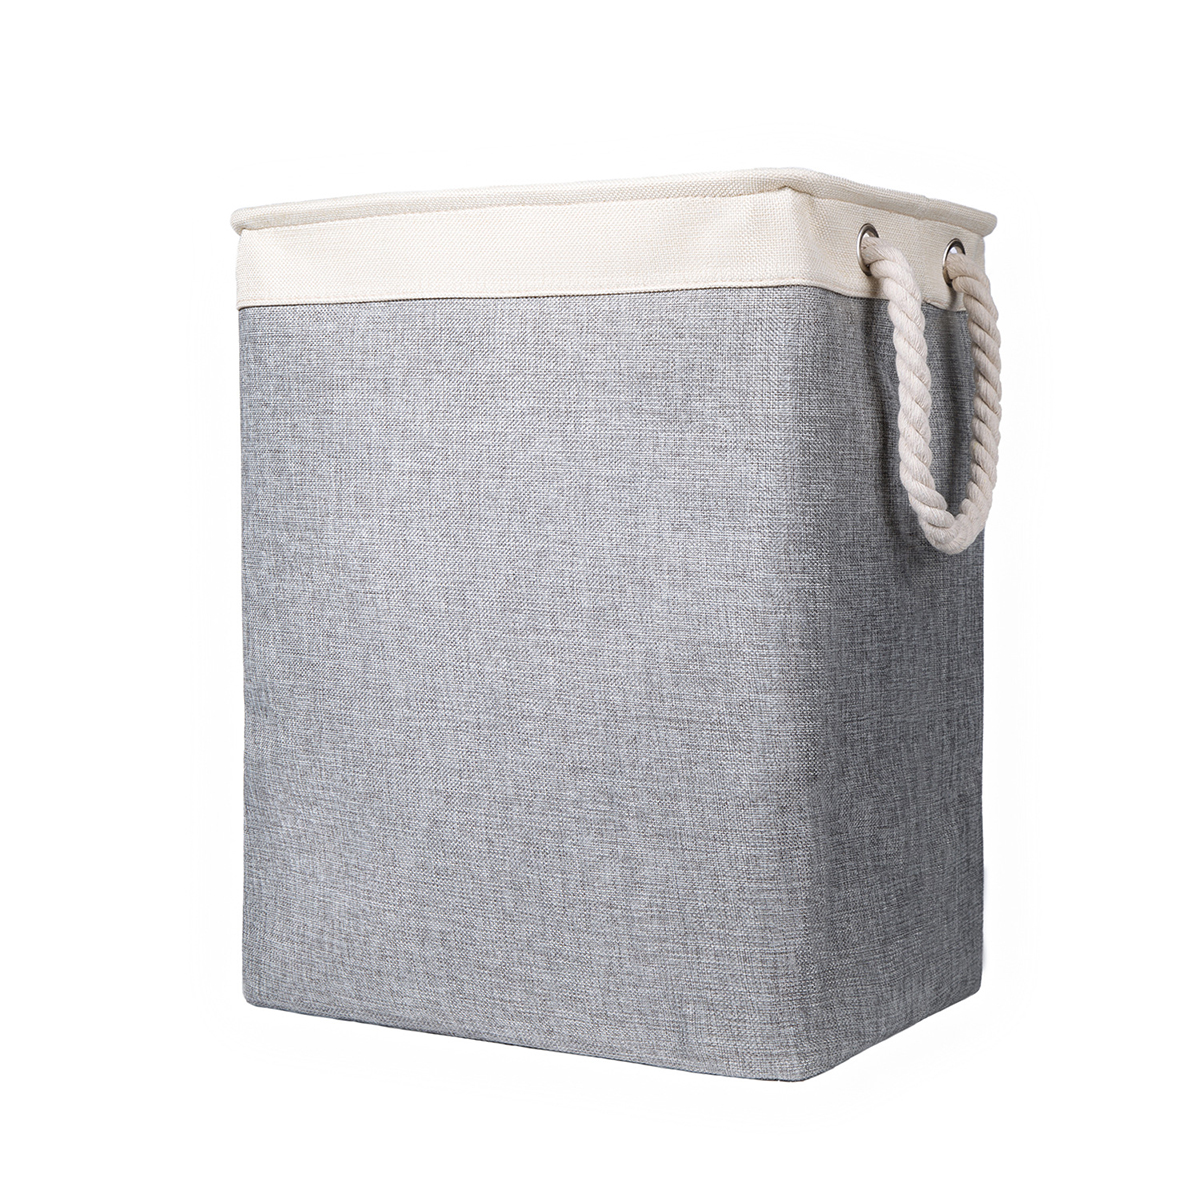 Laundry-Baskets-with-Handles-Collapsible-Linen-Hampers-Bedroom-Foldable-Storage-Laundry-Hamper-for-T-1788699-2